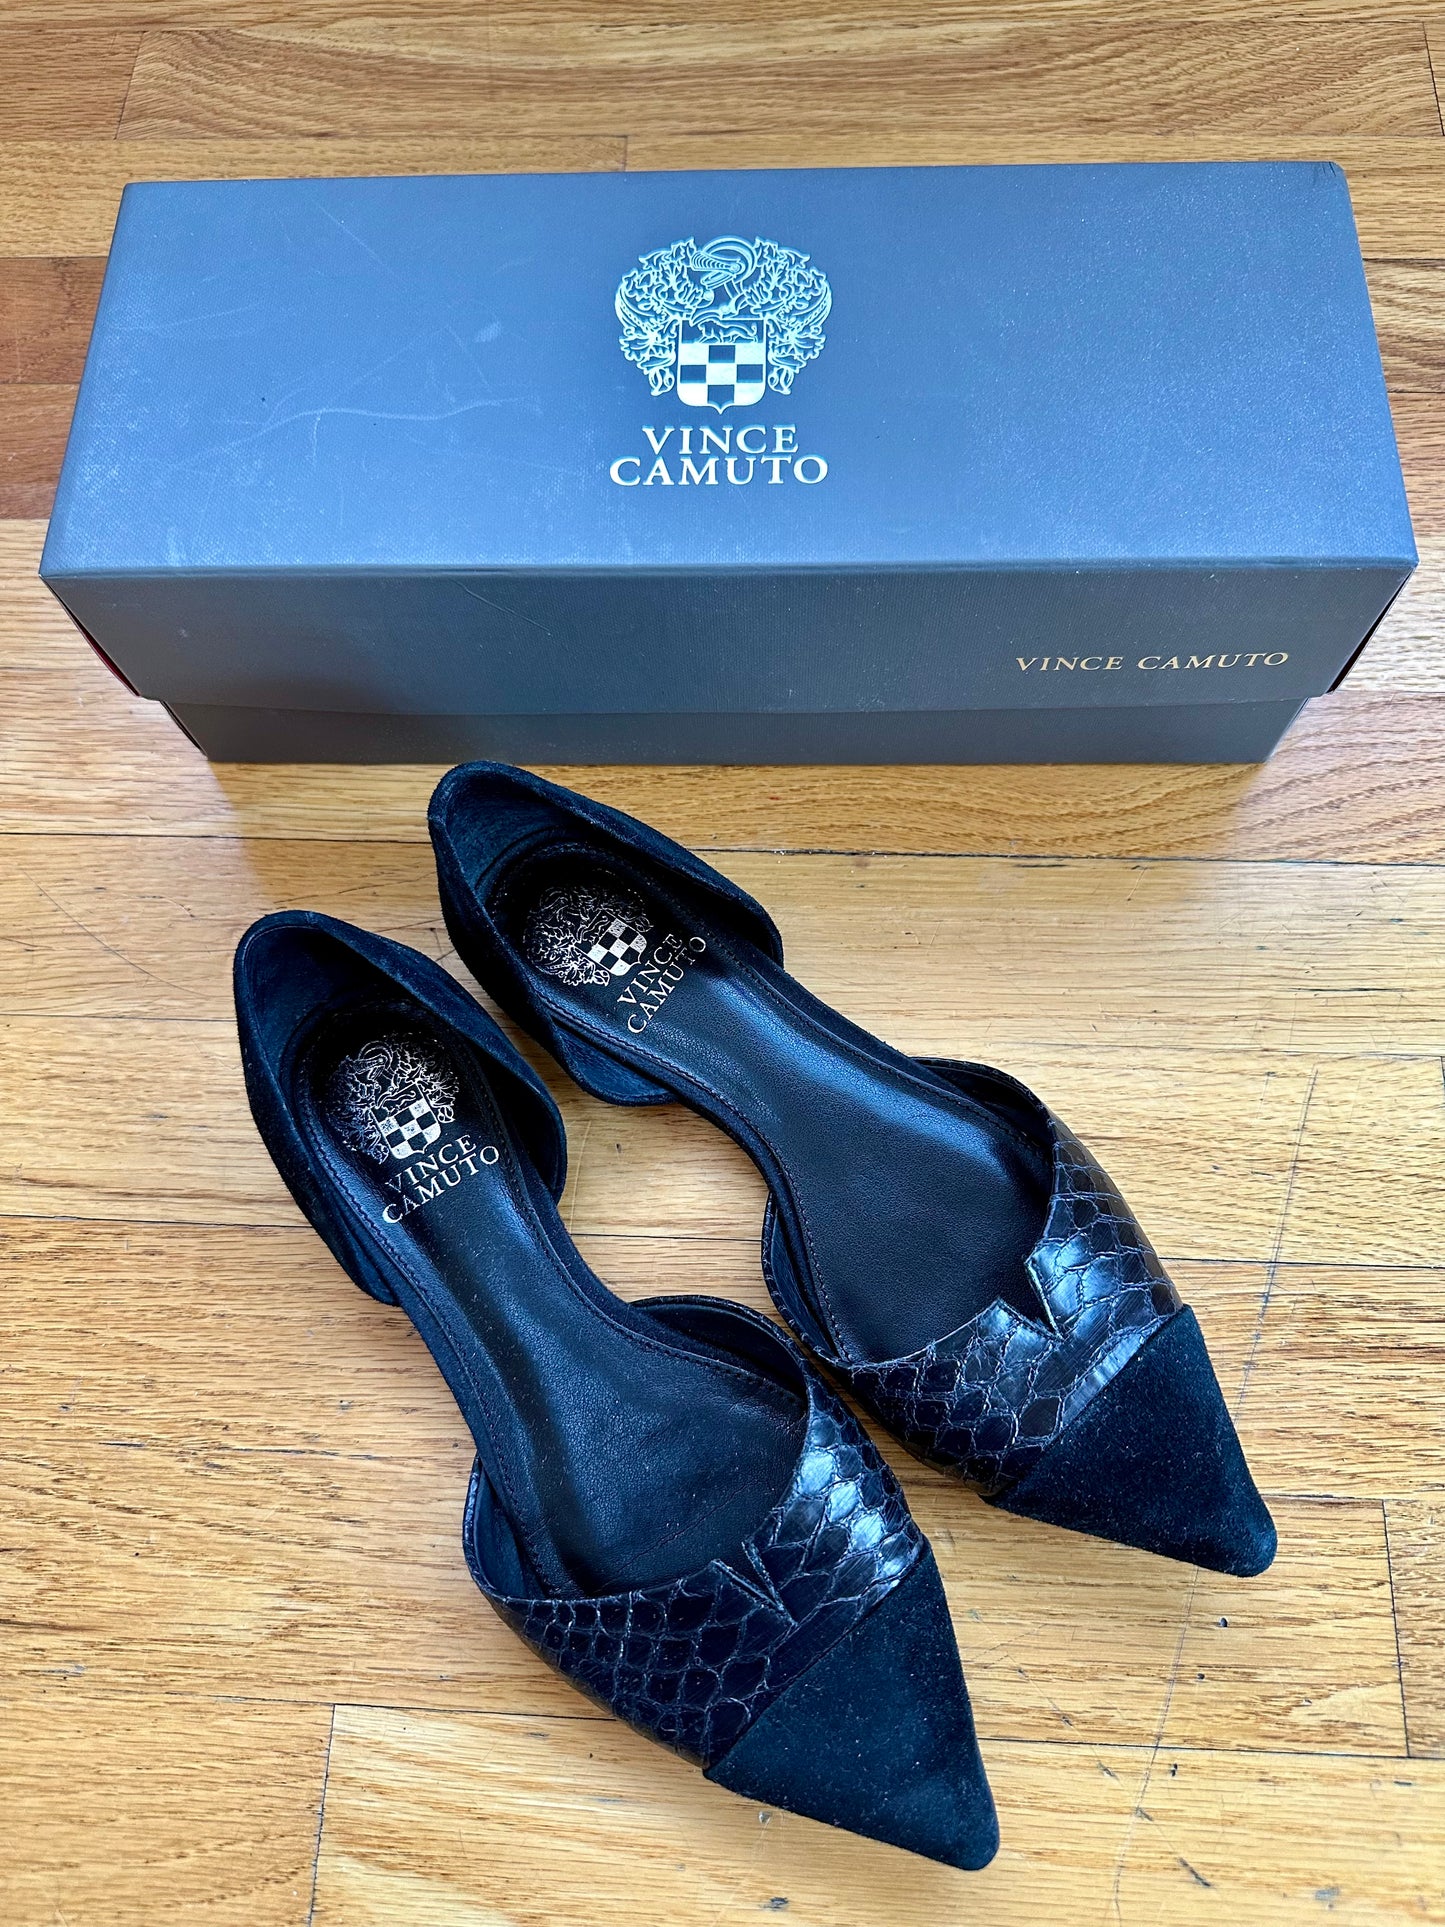 Women’s 7.5 Vince Camuto Halia D’orsay Pointed Toe Flats